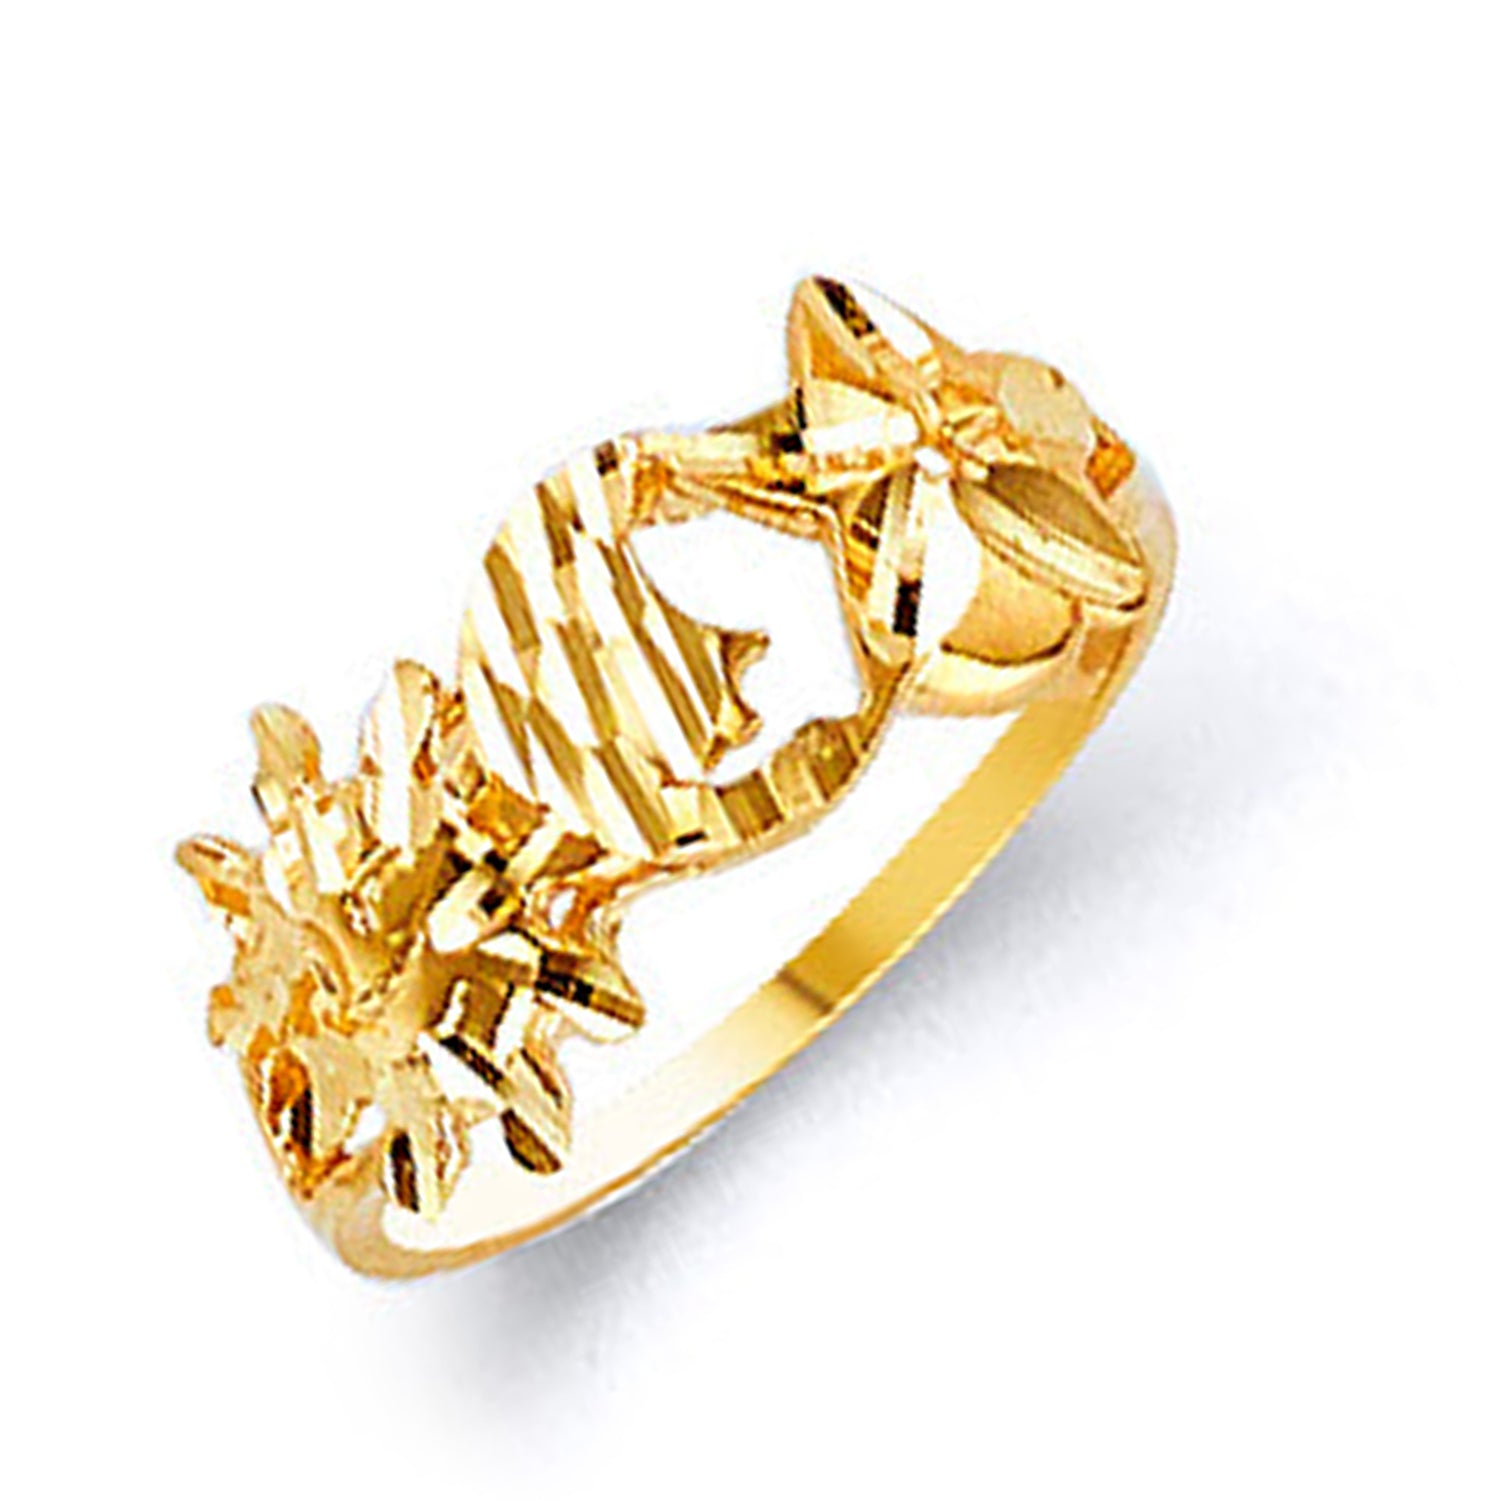 East-west Multi-patterned Ring in Solid Gold 